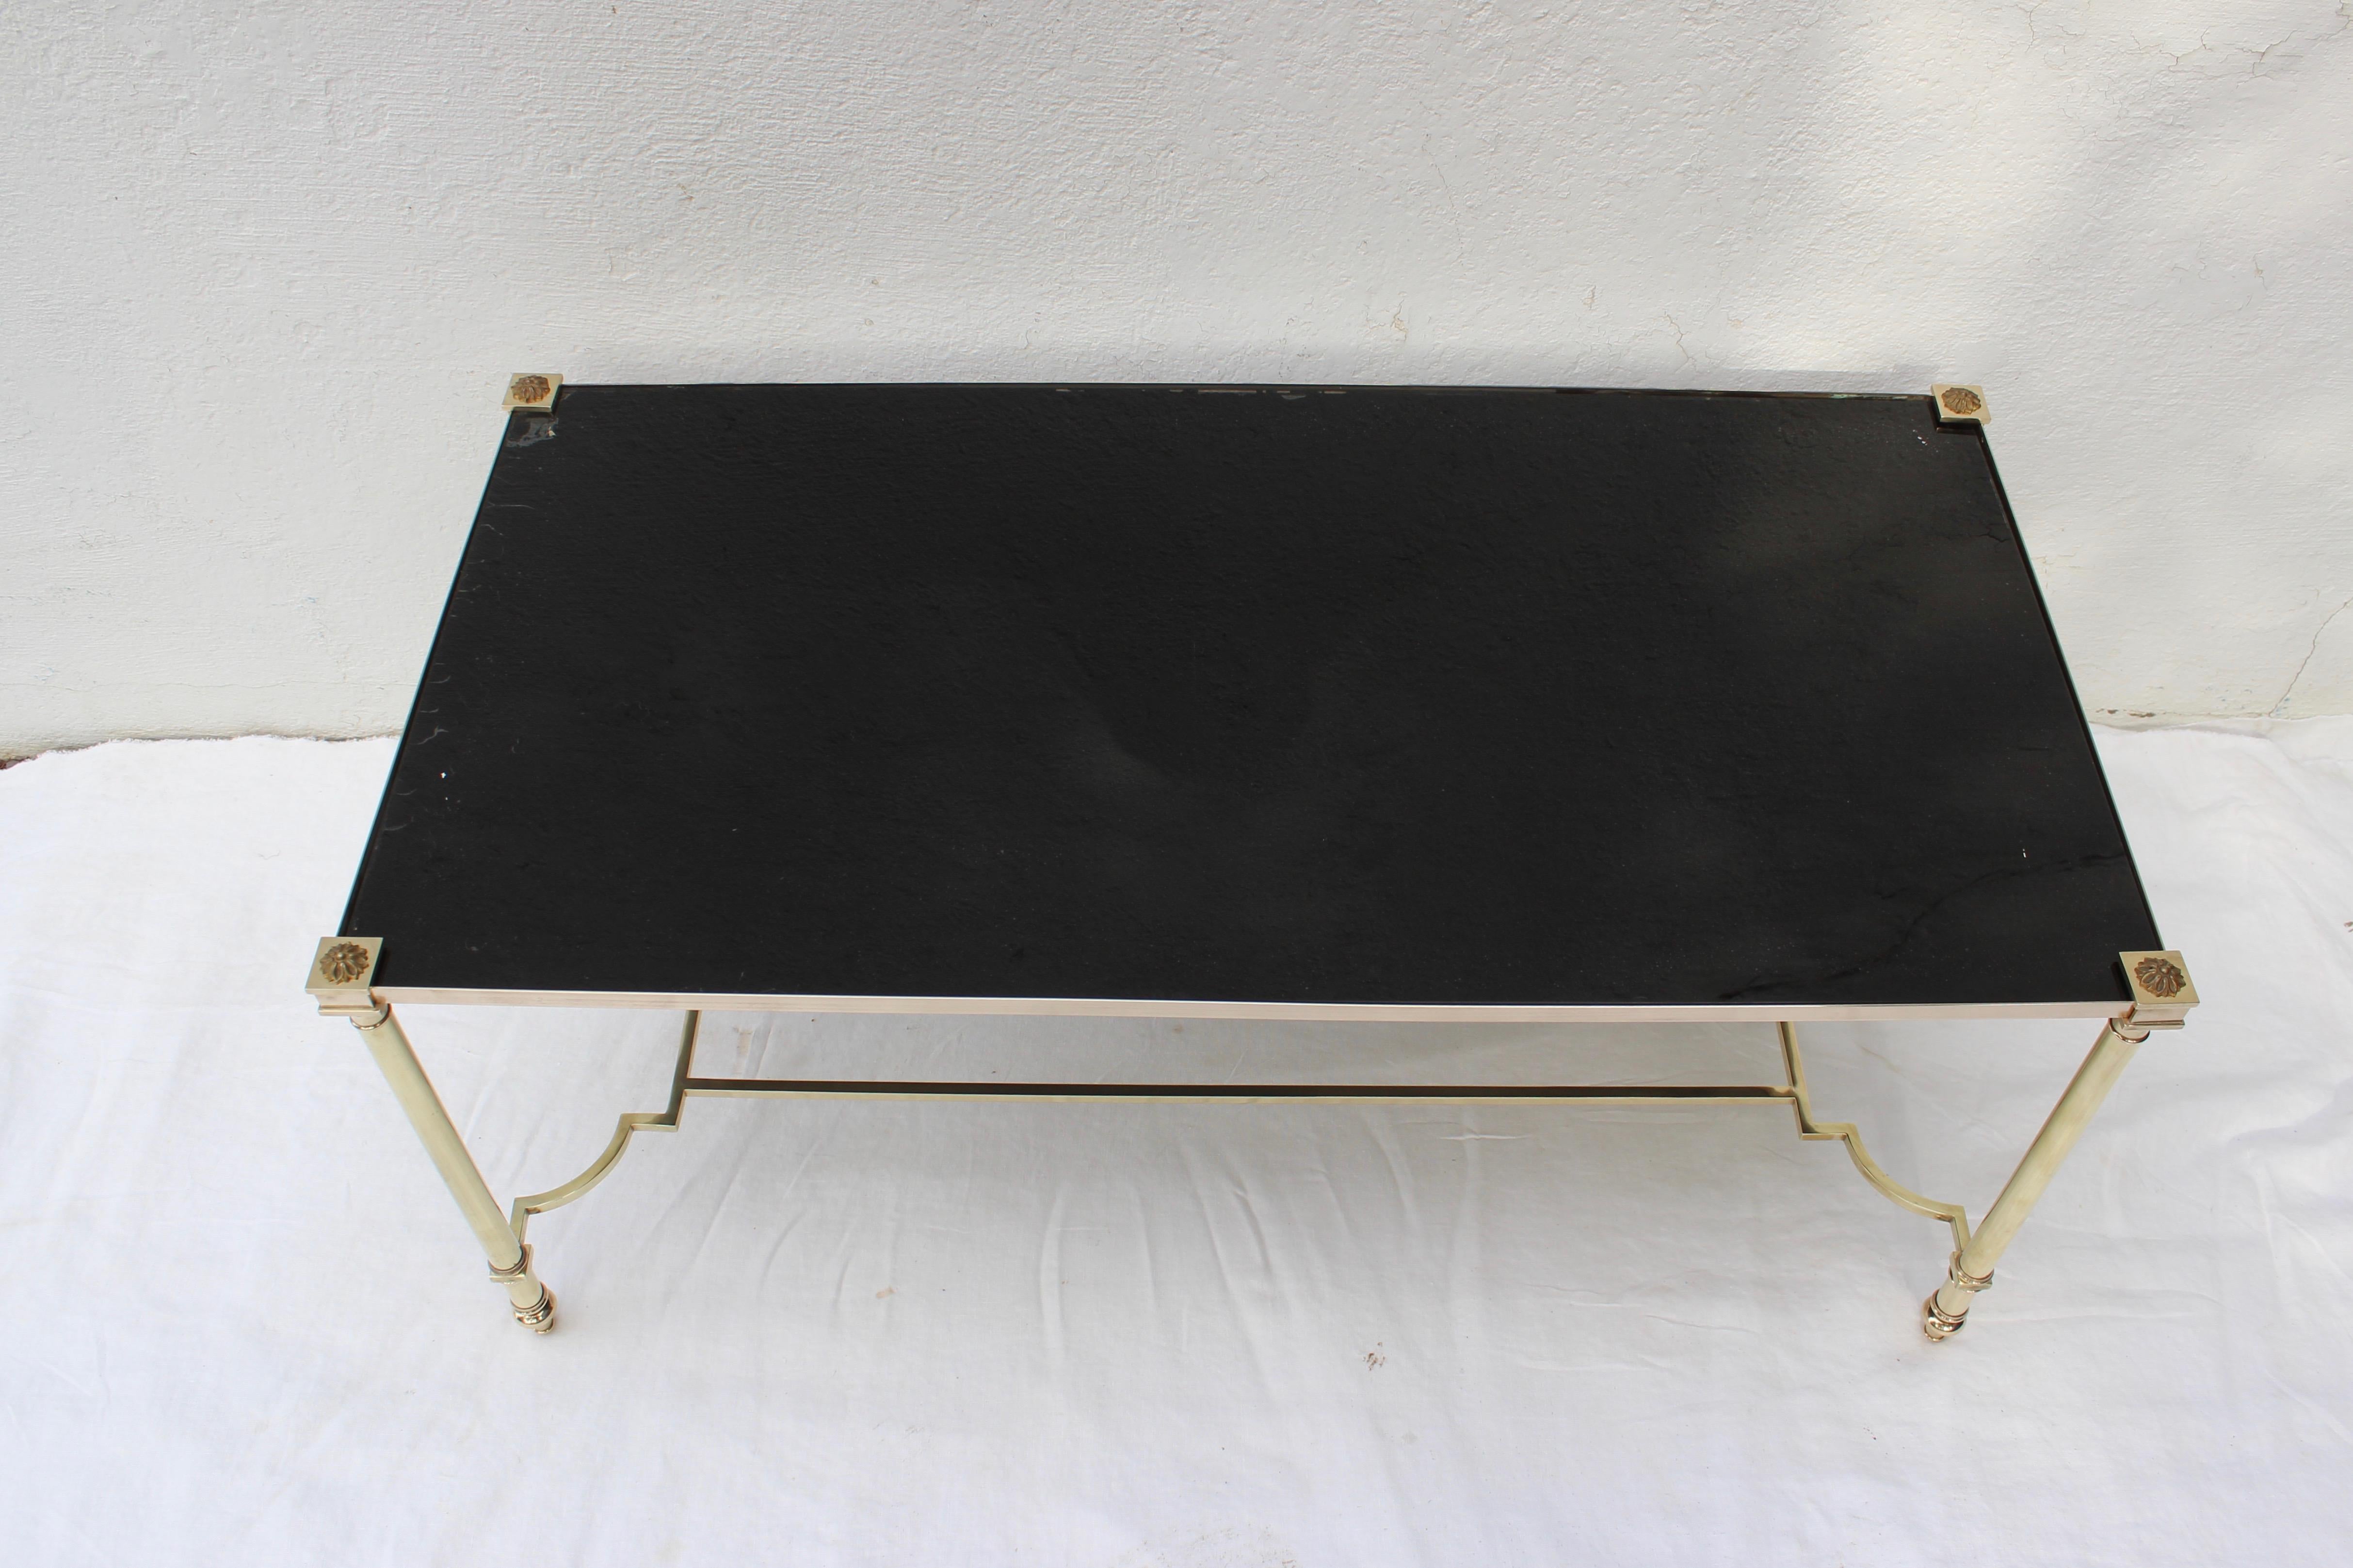 Bronze coffee table with painted black glass top by Maison Jansen.